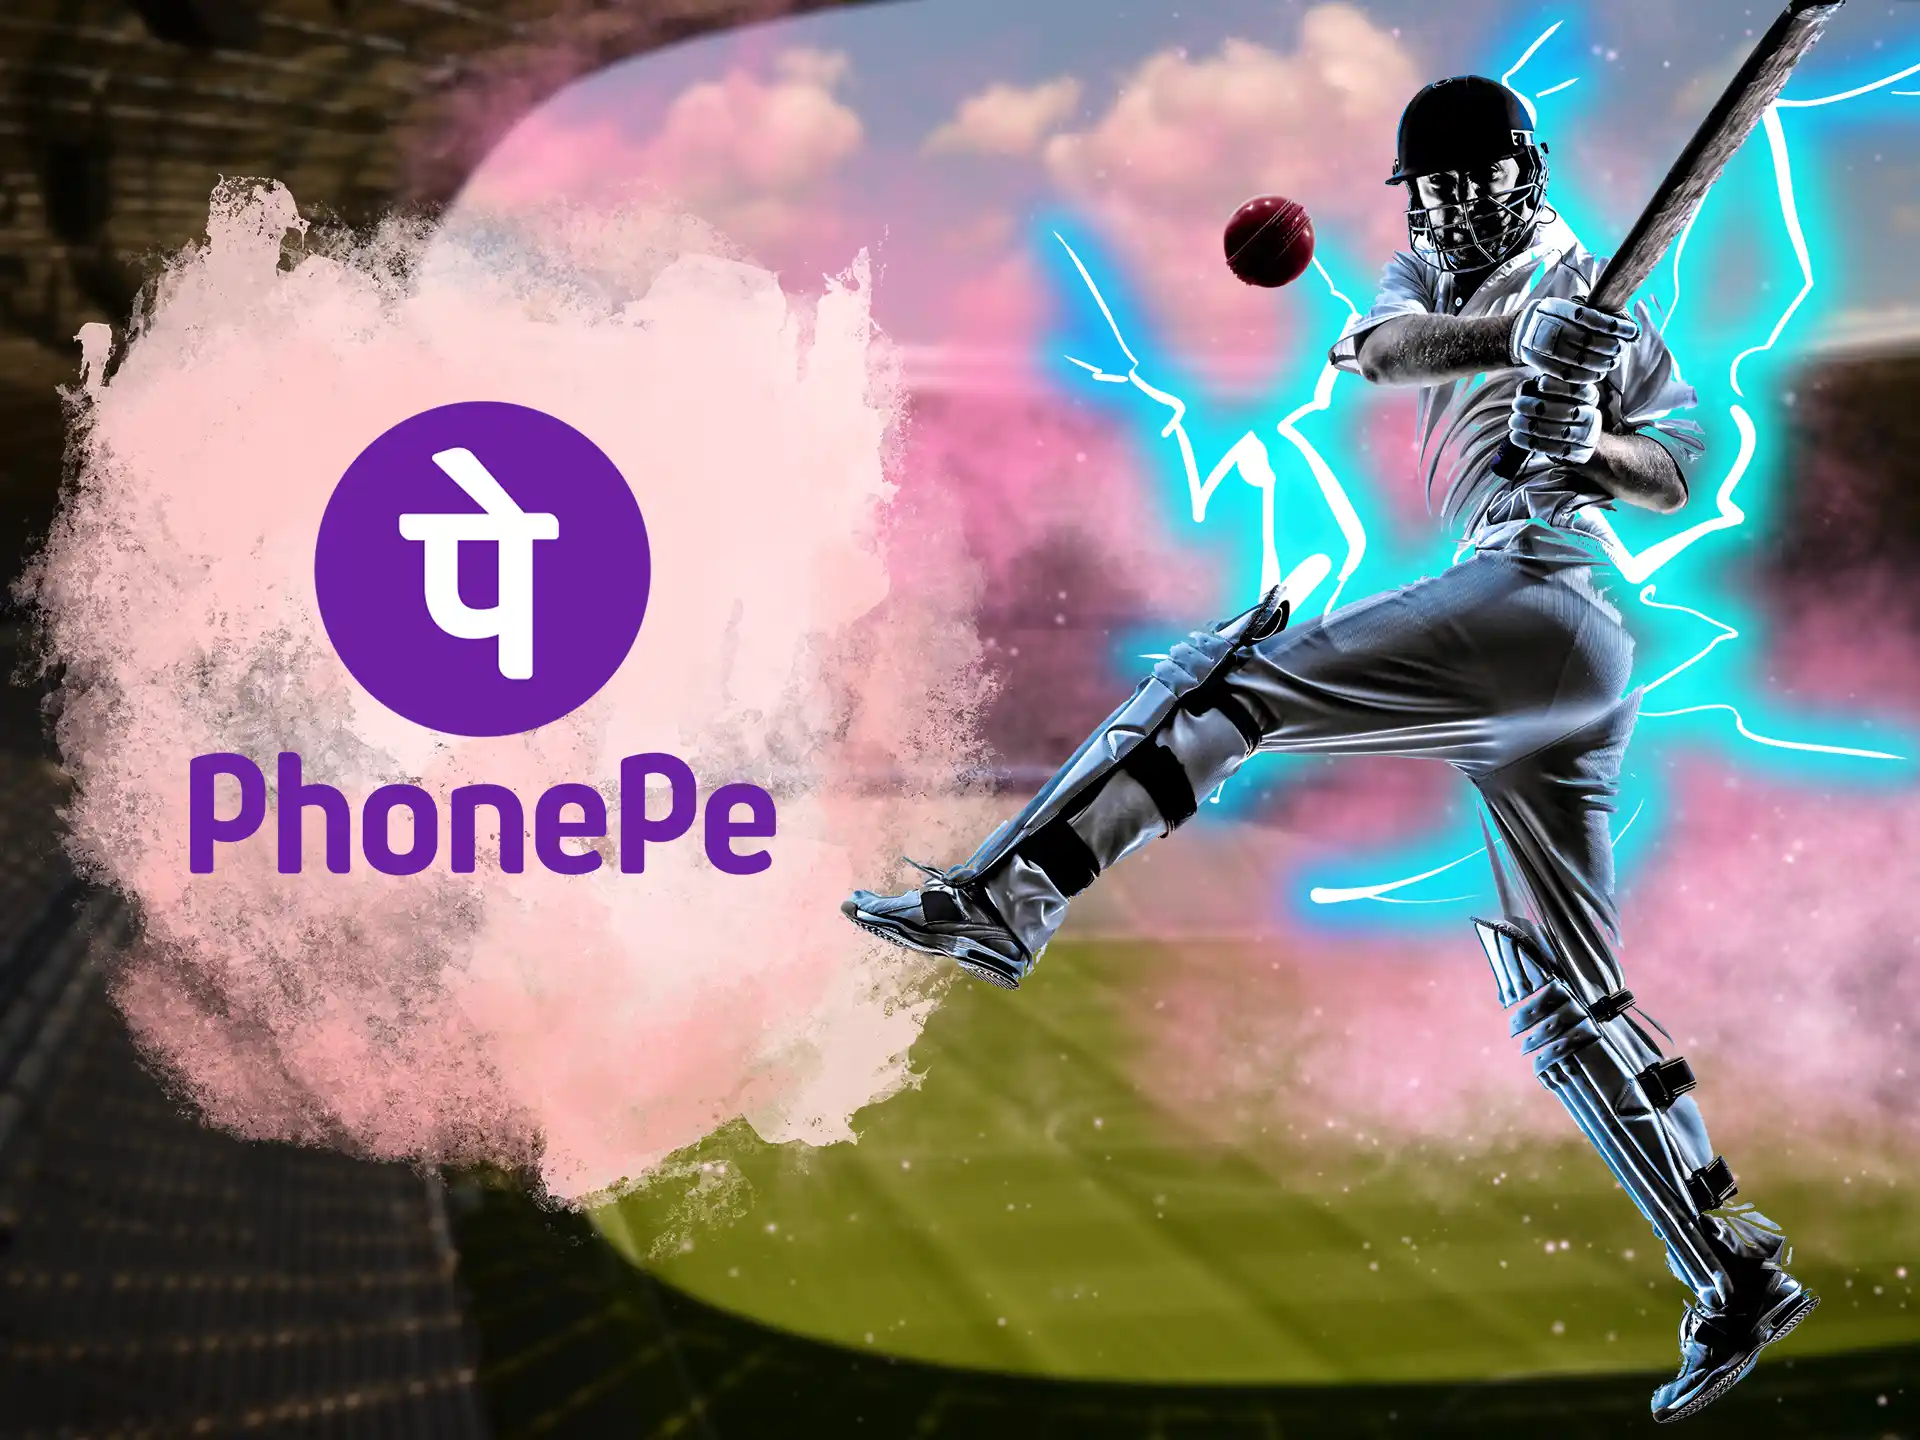 To withdraw money from a virtual bookmaker account, use PhonePe, as it is a very popular wallet in India.